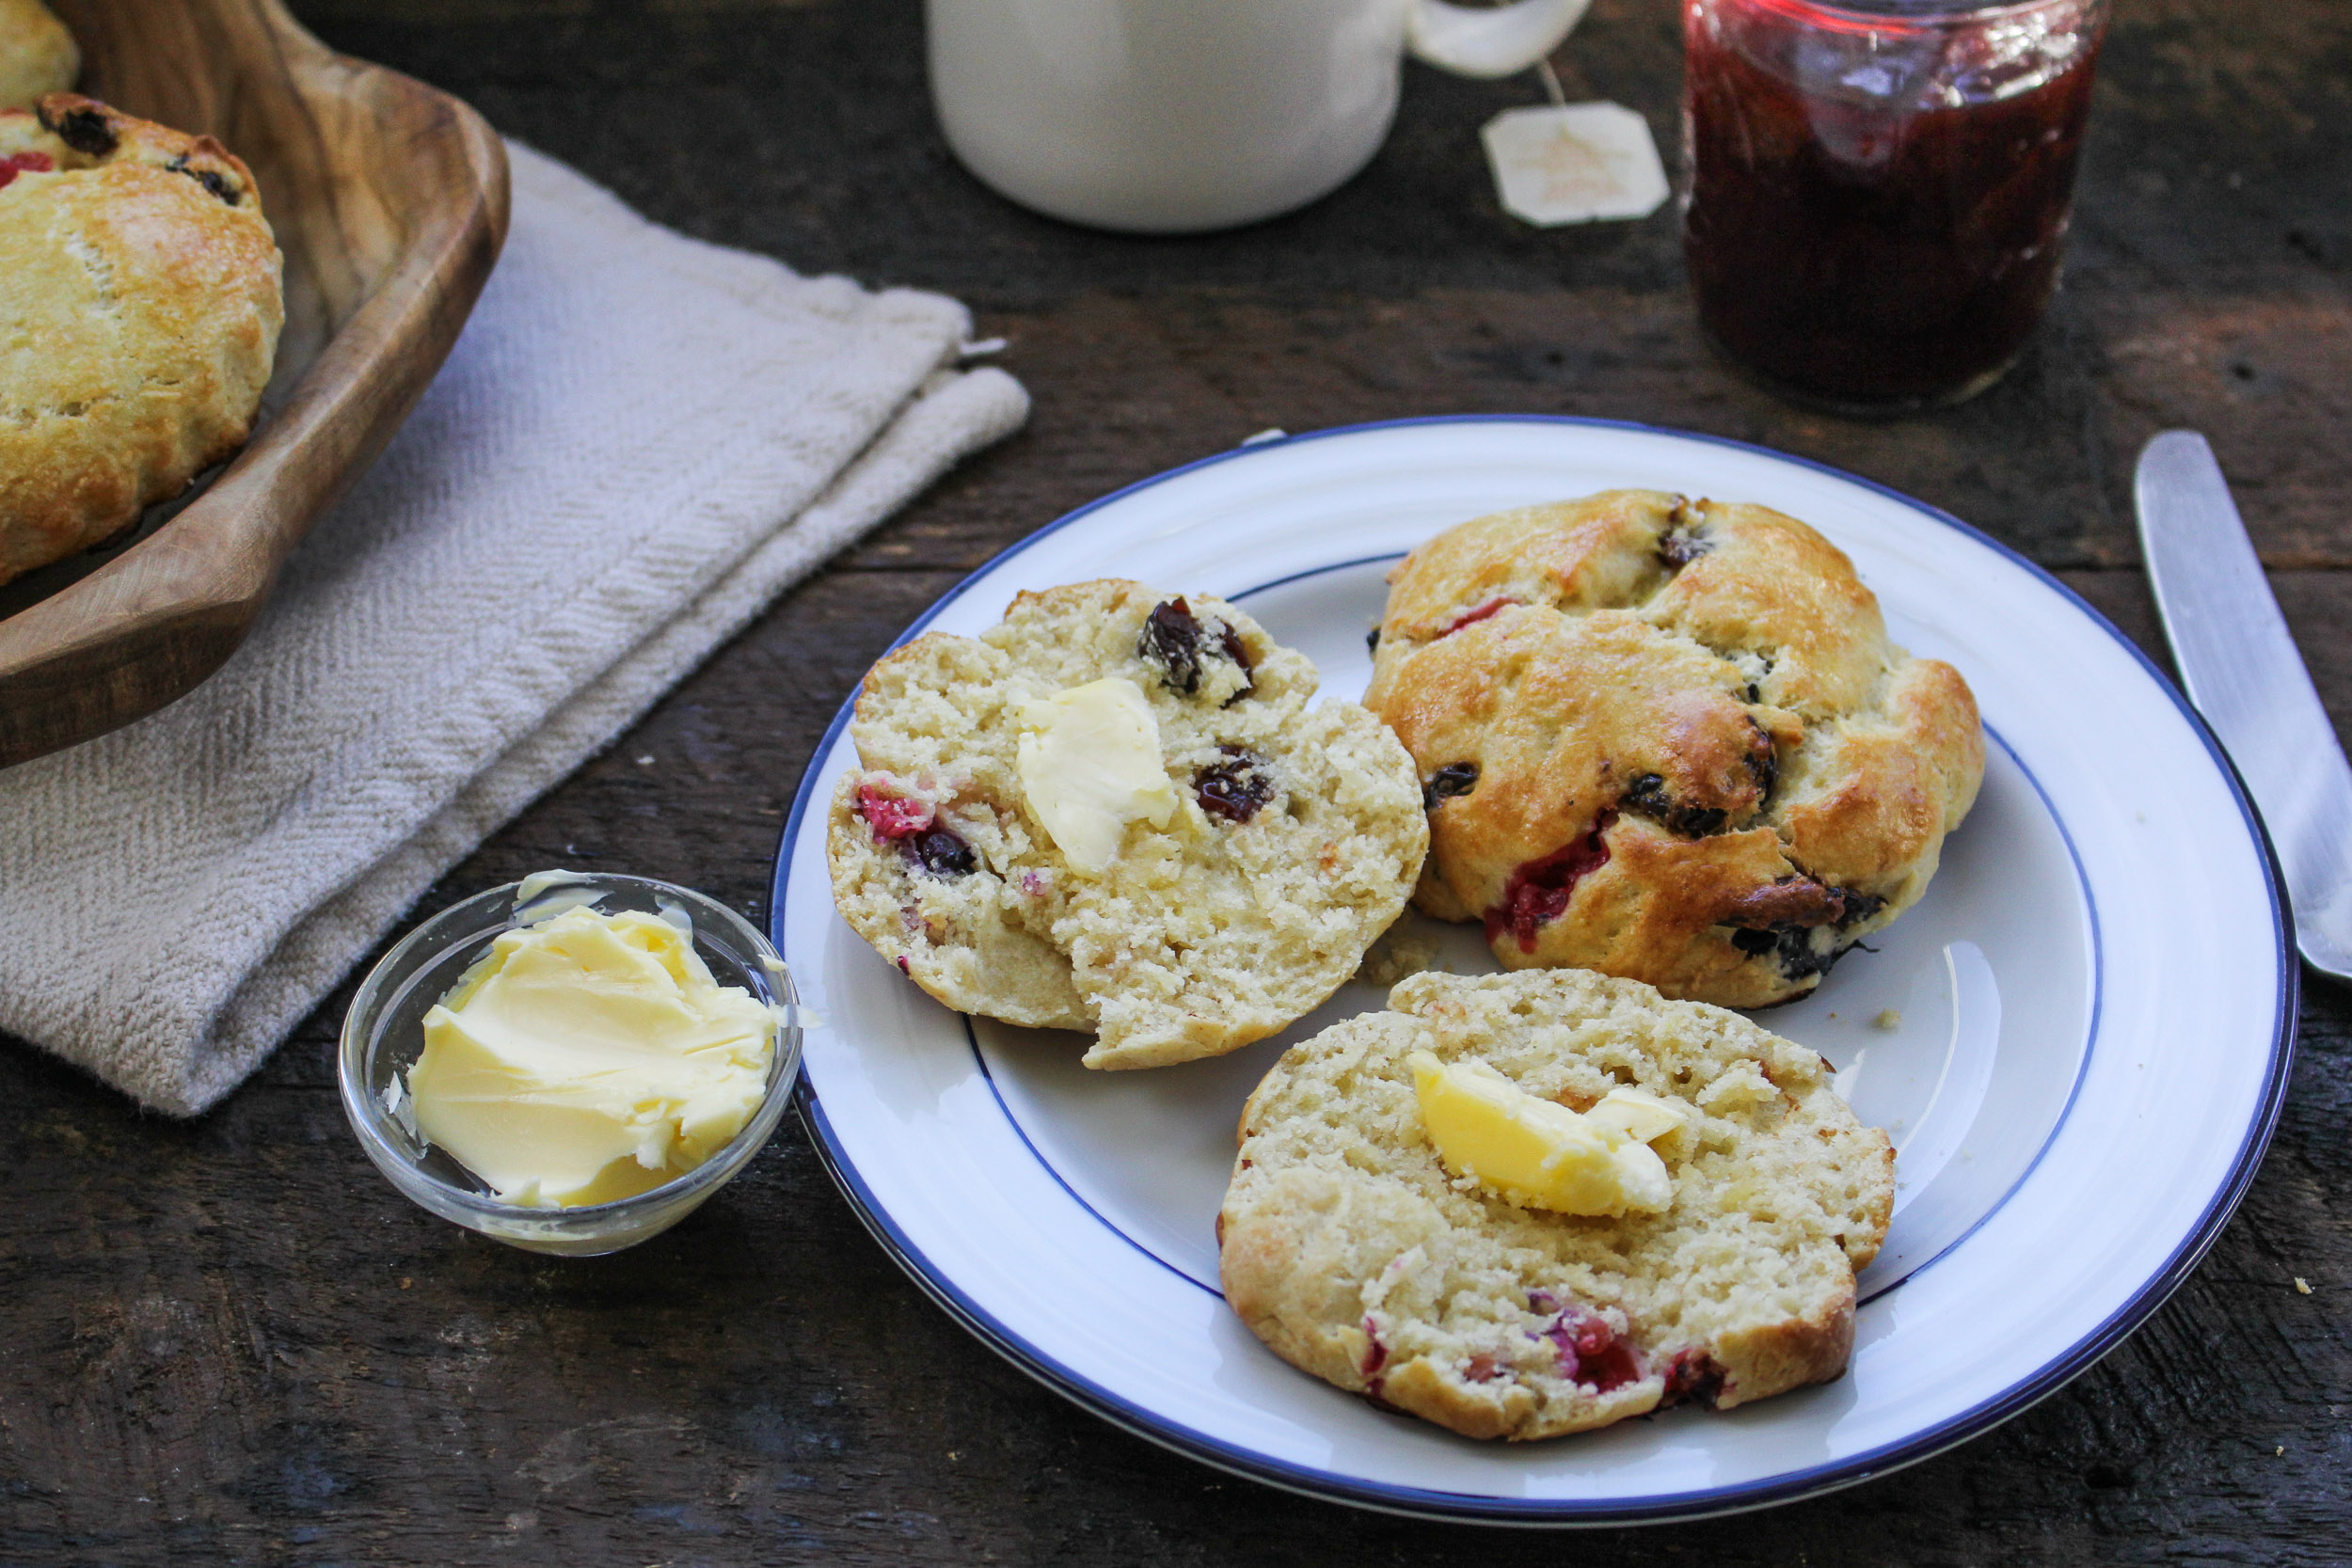 Olive Oil Scones with Red Currants and Sour Cherries {Katie at the Kitchen Door}